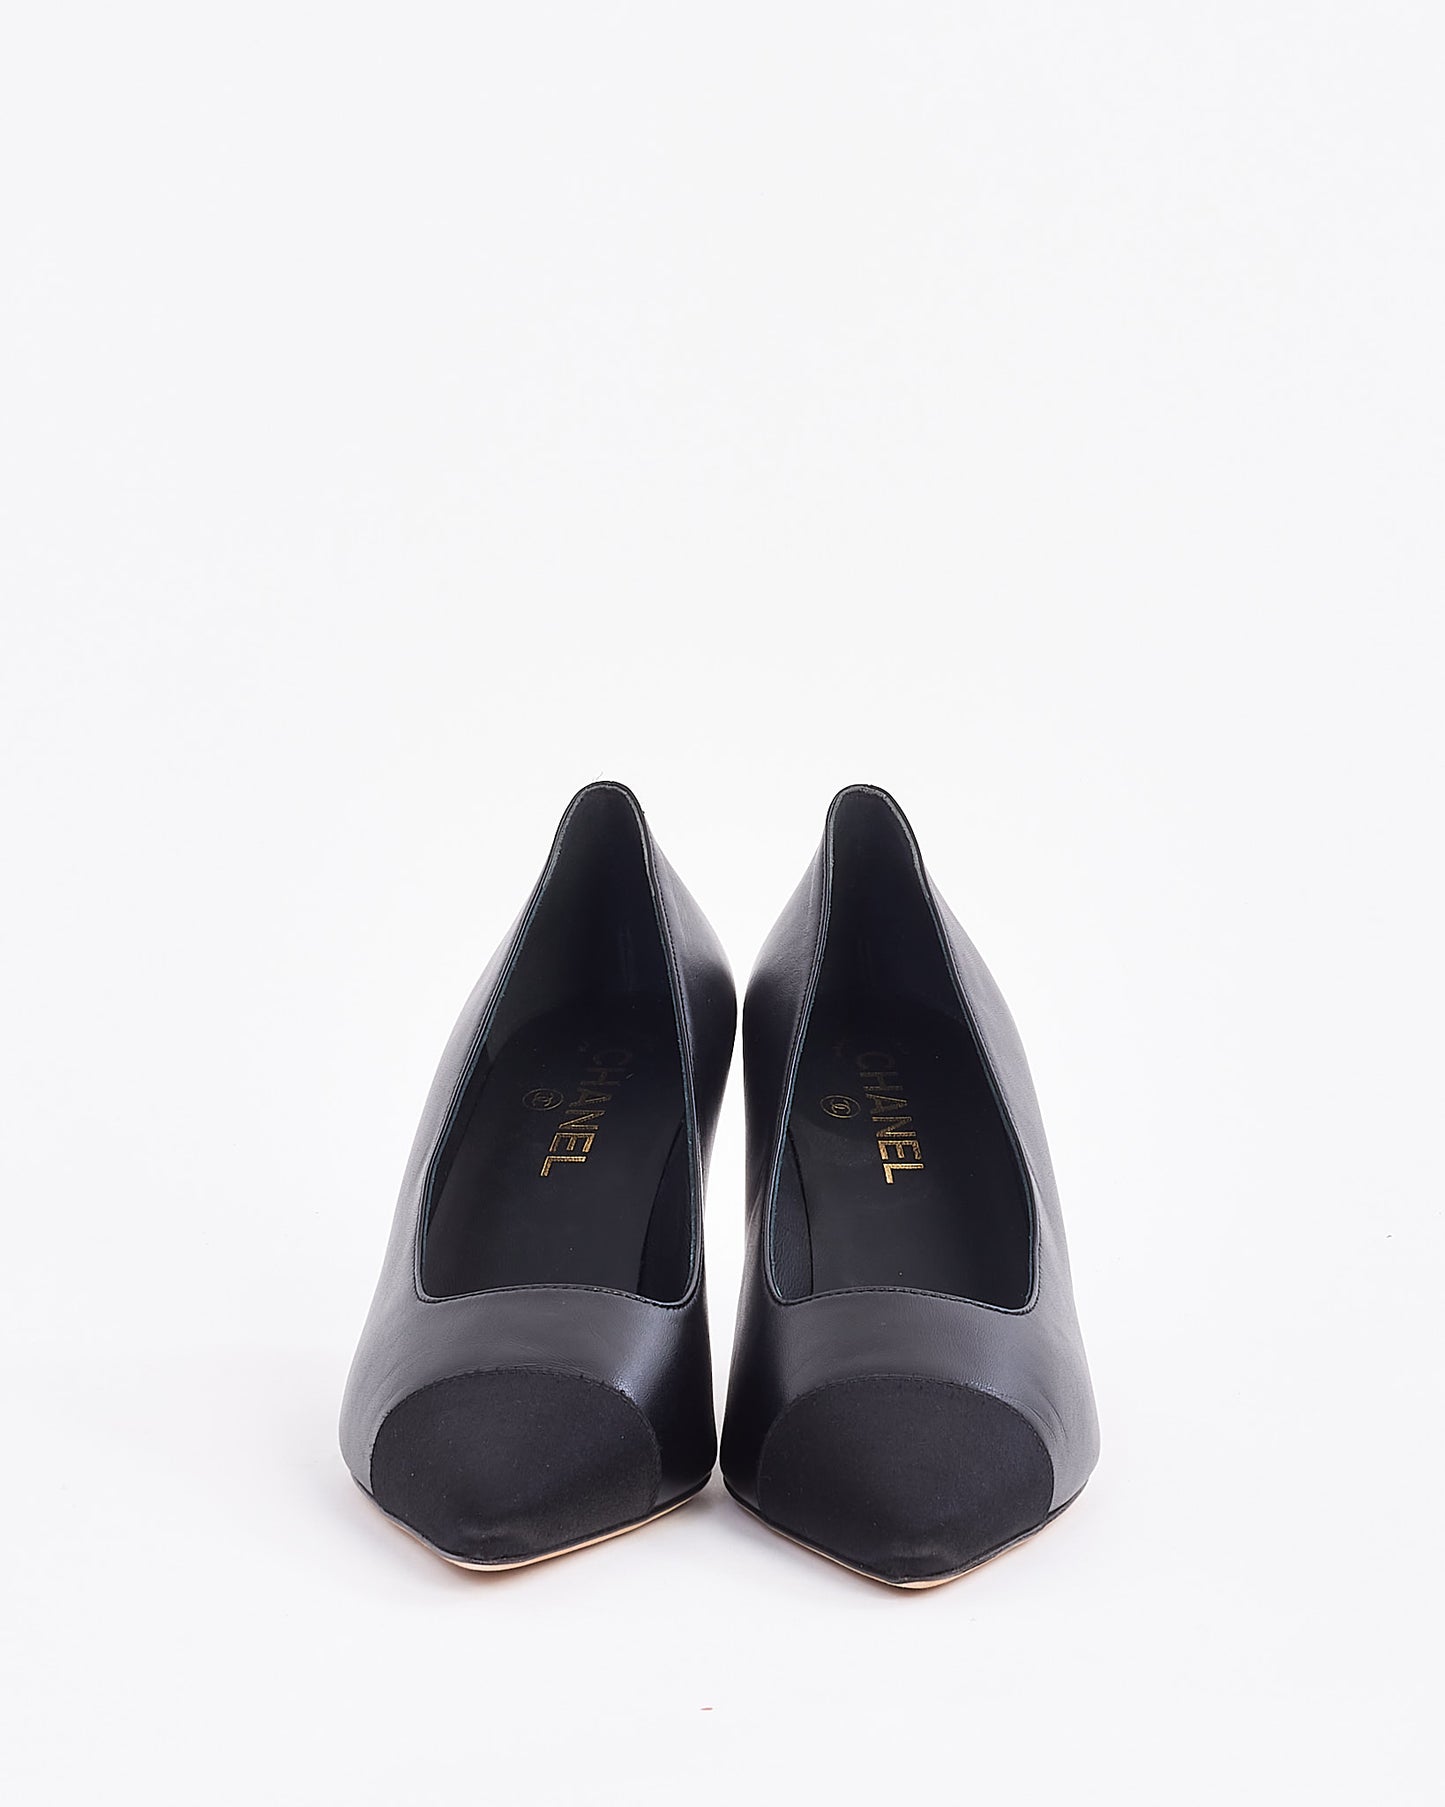 Chanel Black Lambskin Leather CC Heel Pointed Toe Pumps - 39.5